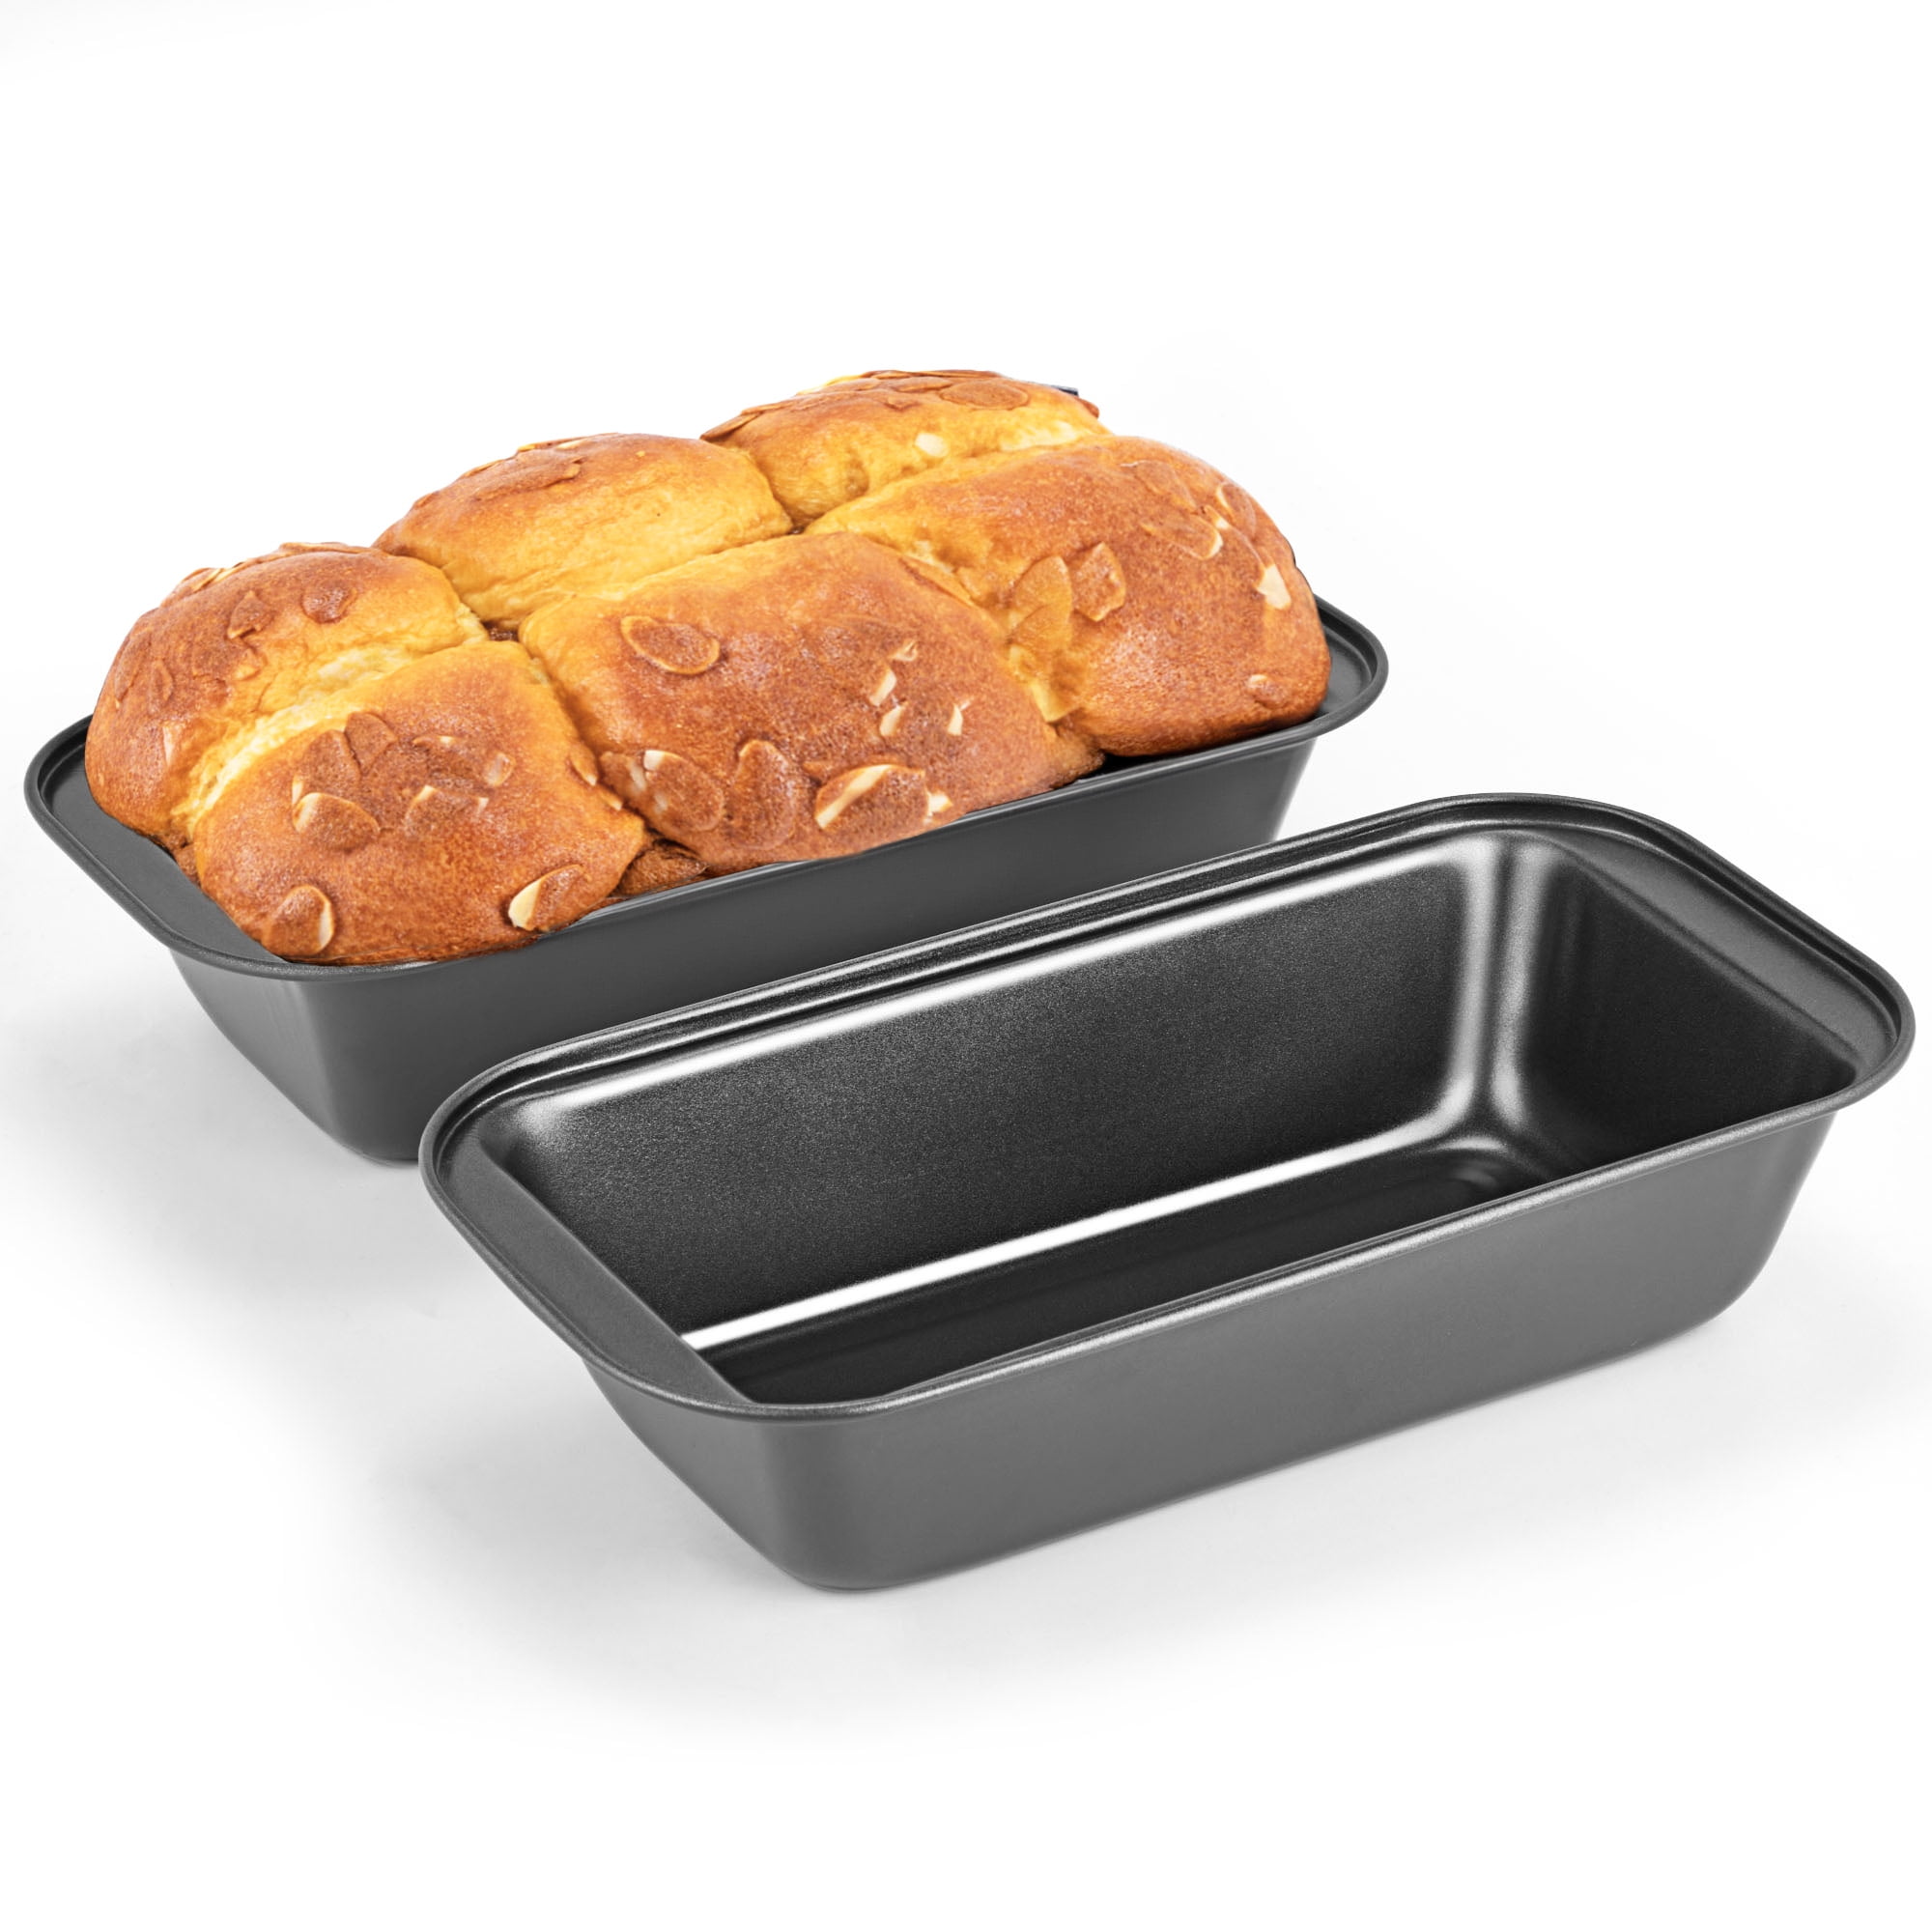 KITESSENSU 2 Pack Bread Pan, Nonstick Loaf Pan with Easy Grips Handles,  Carbon Steel Loaf Pans for Baking, Gray 